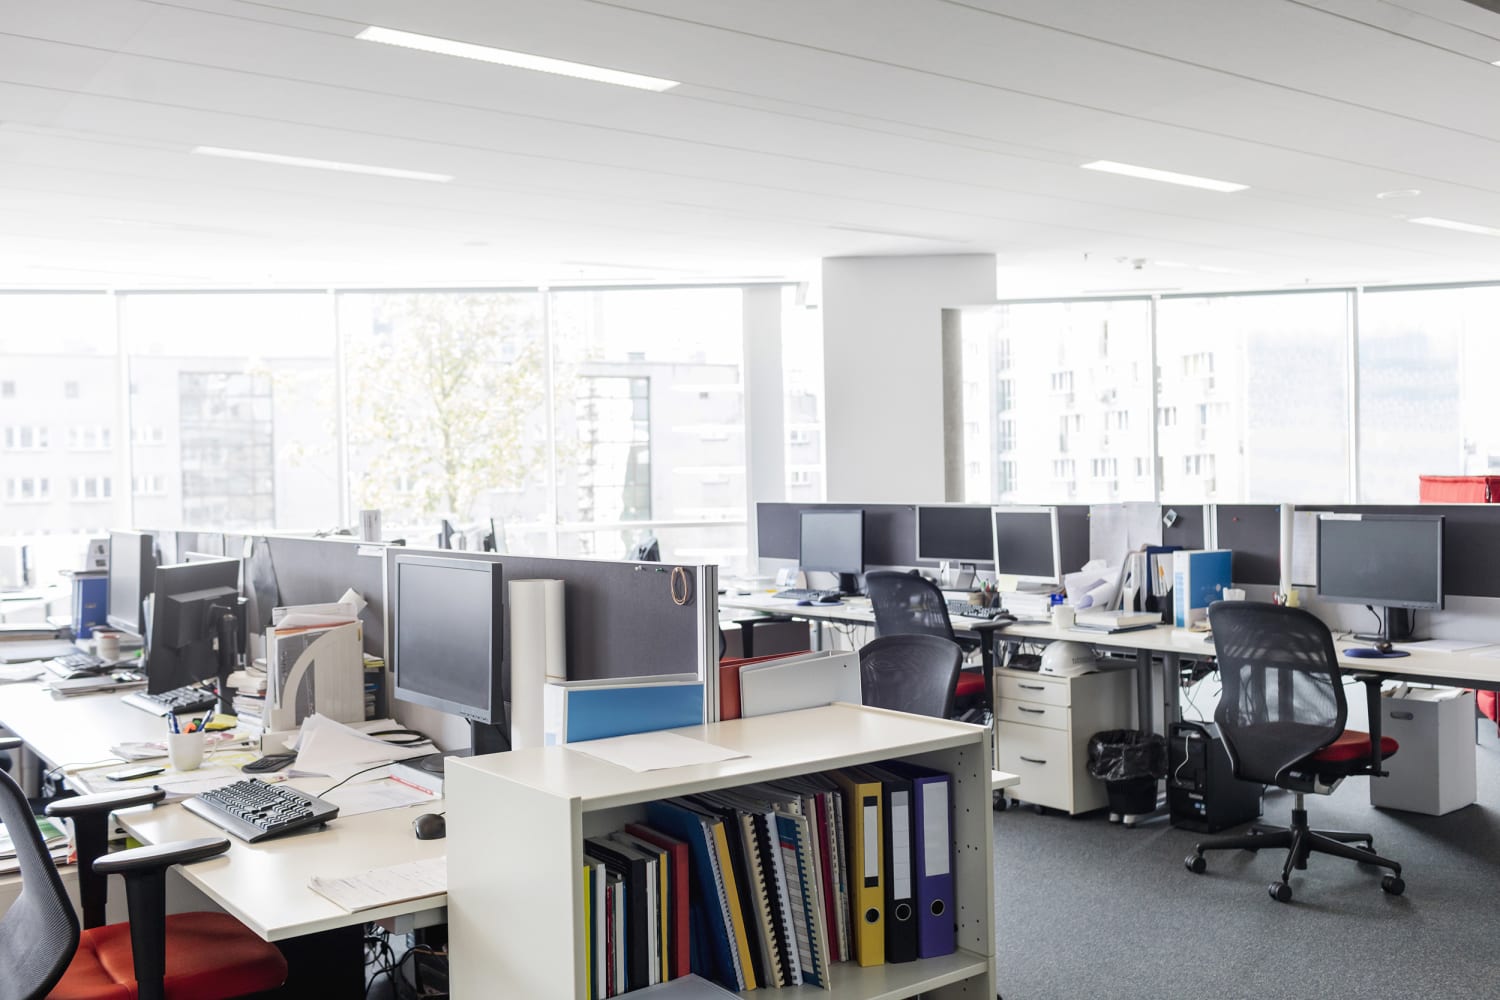 Open offices vs. cubicles? Workplaces adopt hybrid models